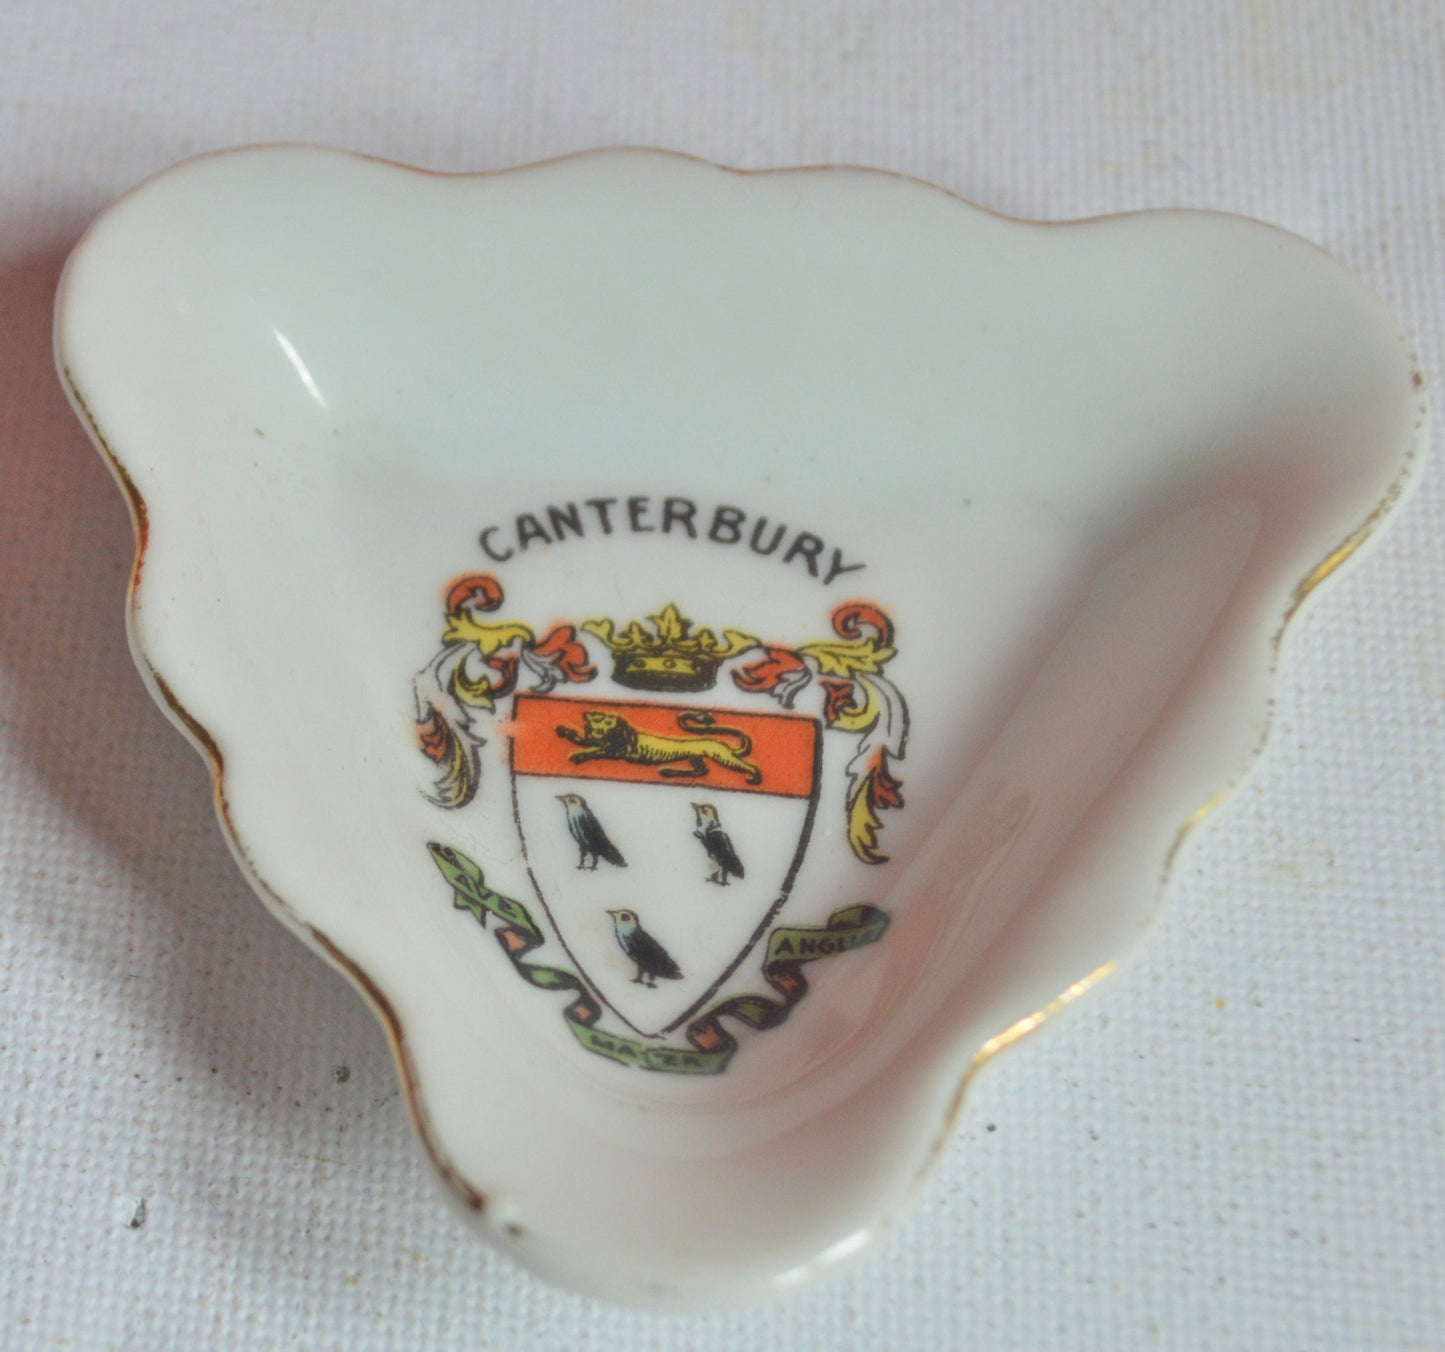 TWO PIECES CANTERBURY CRESTED WARE WILLOW ART VASE & UNMARKED PIN DISH(PREVIOUSLY OWNED) GOOD CONDITION - TMD167207